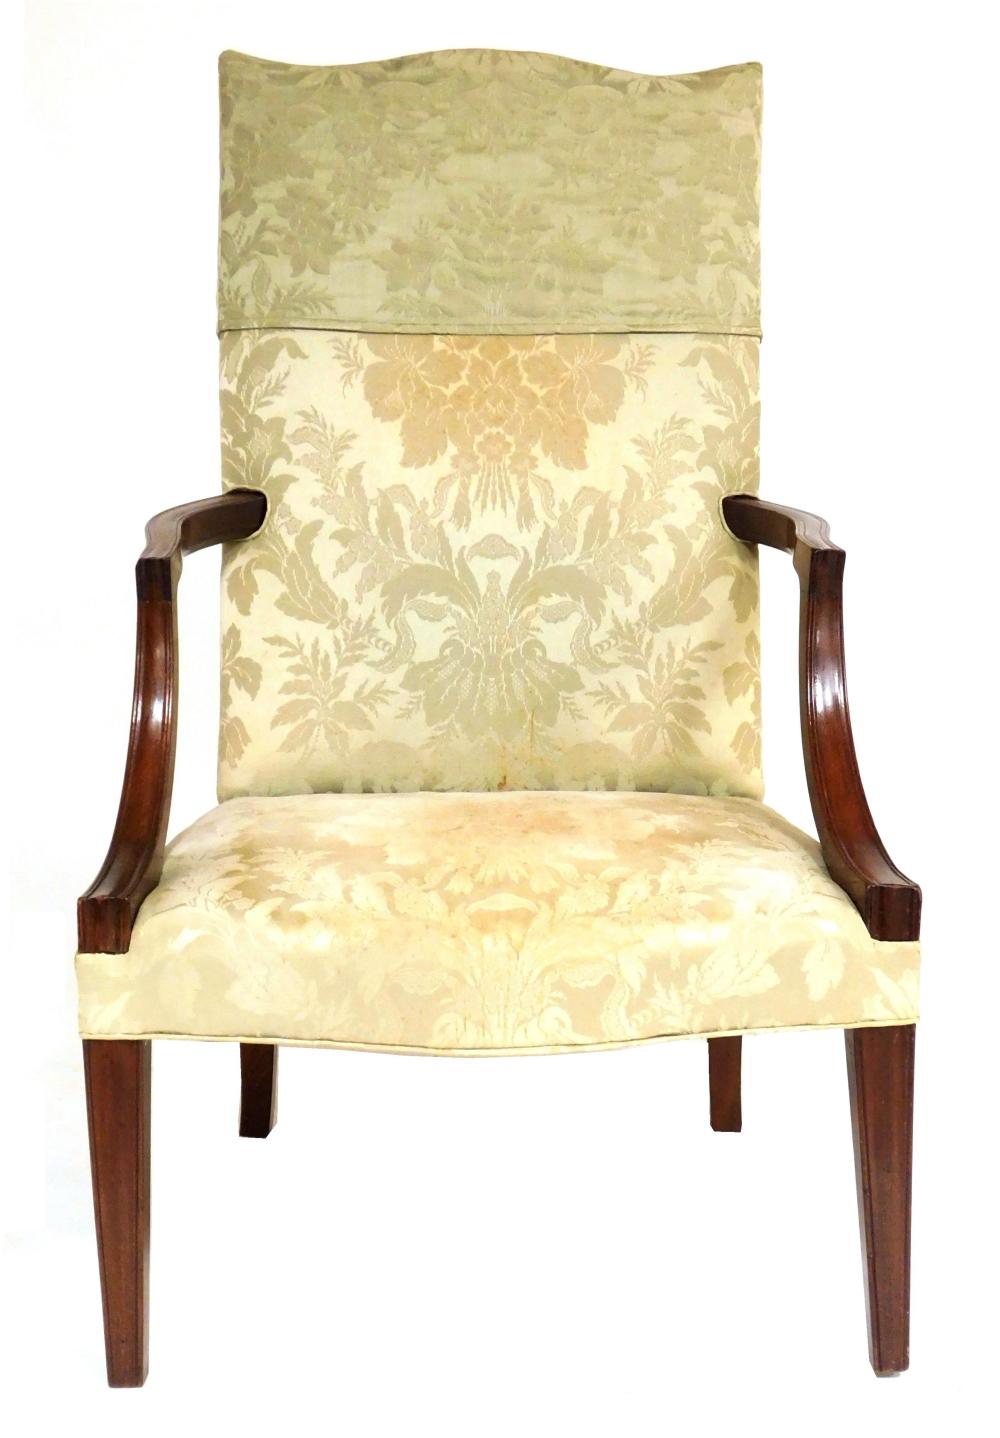 LOLLING CHAIR AMERICAN LATE 18TH 31e5a1